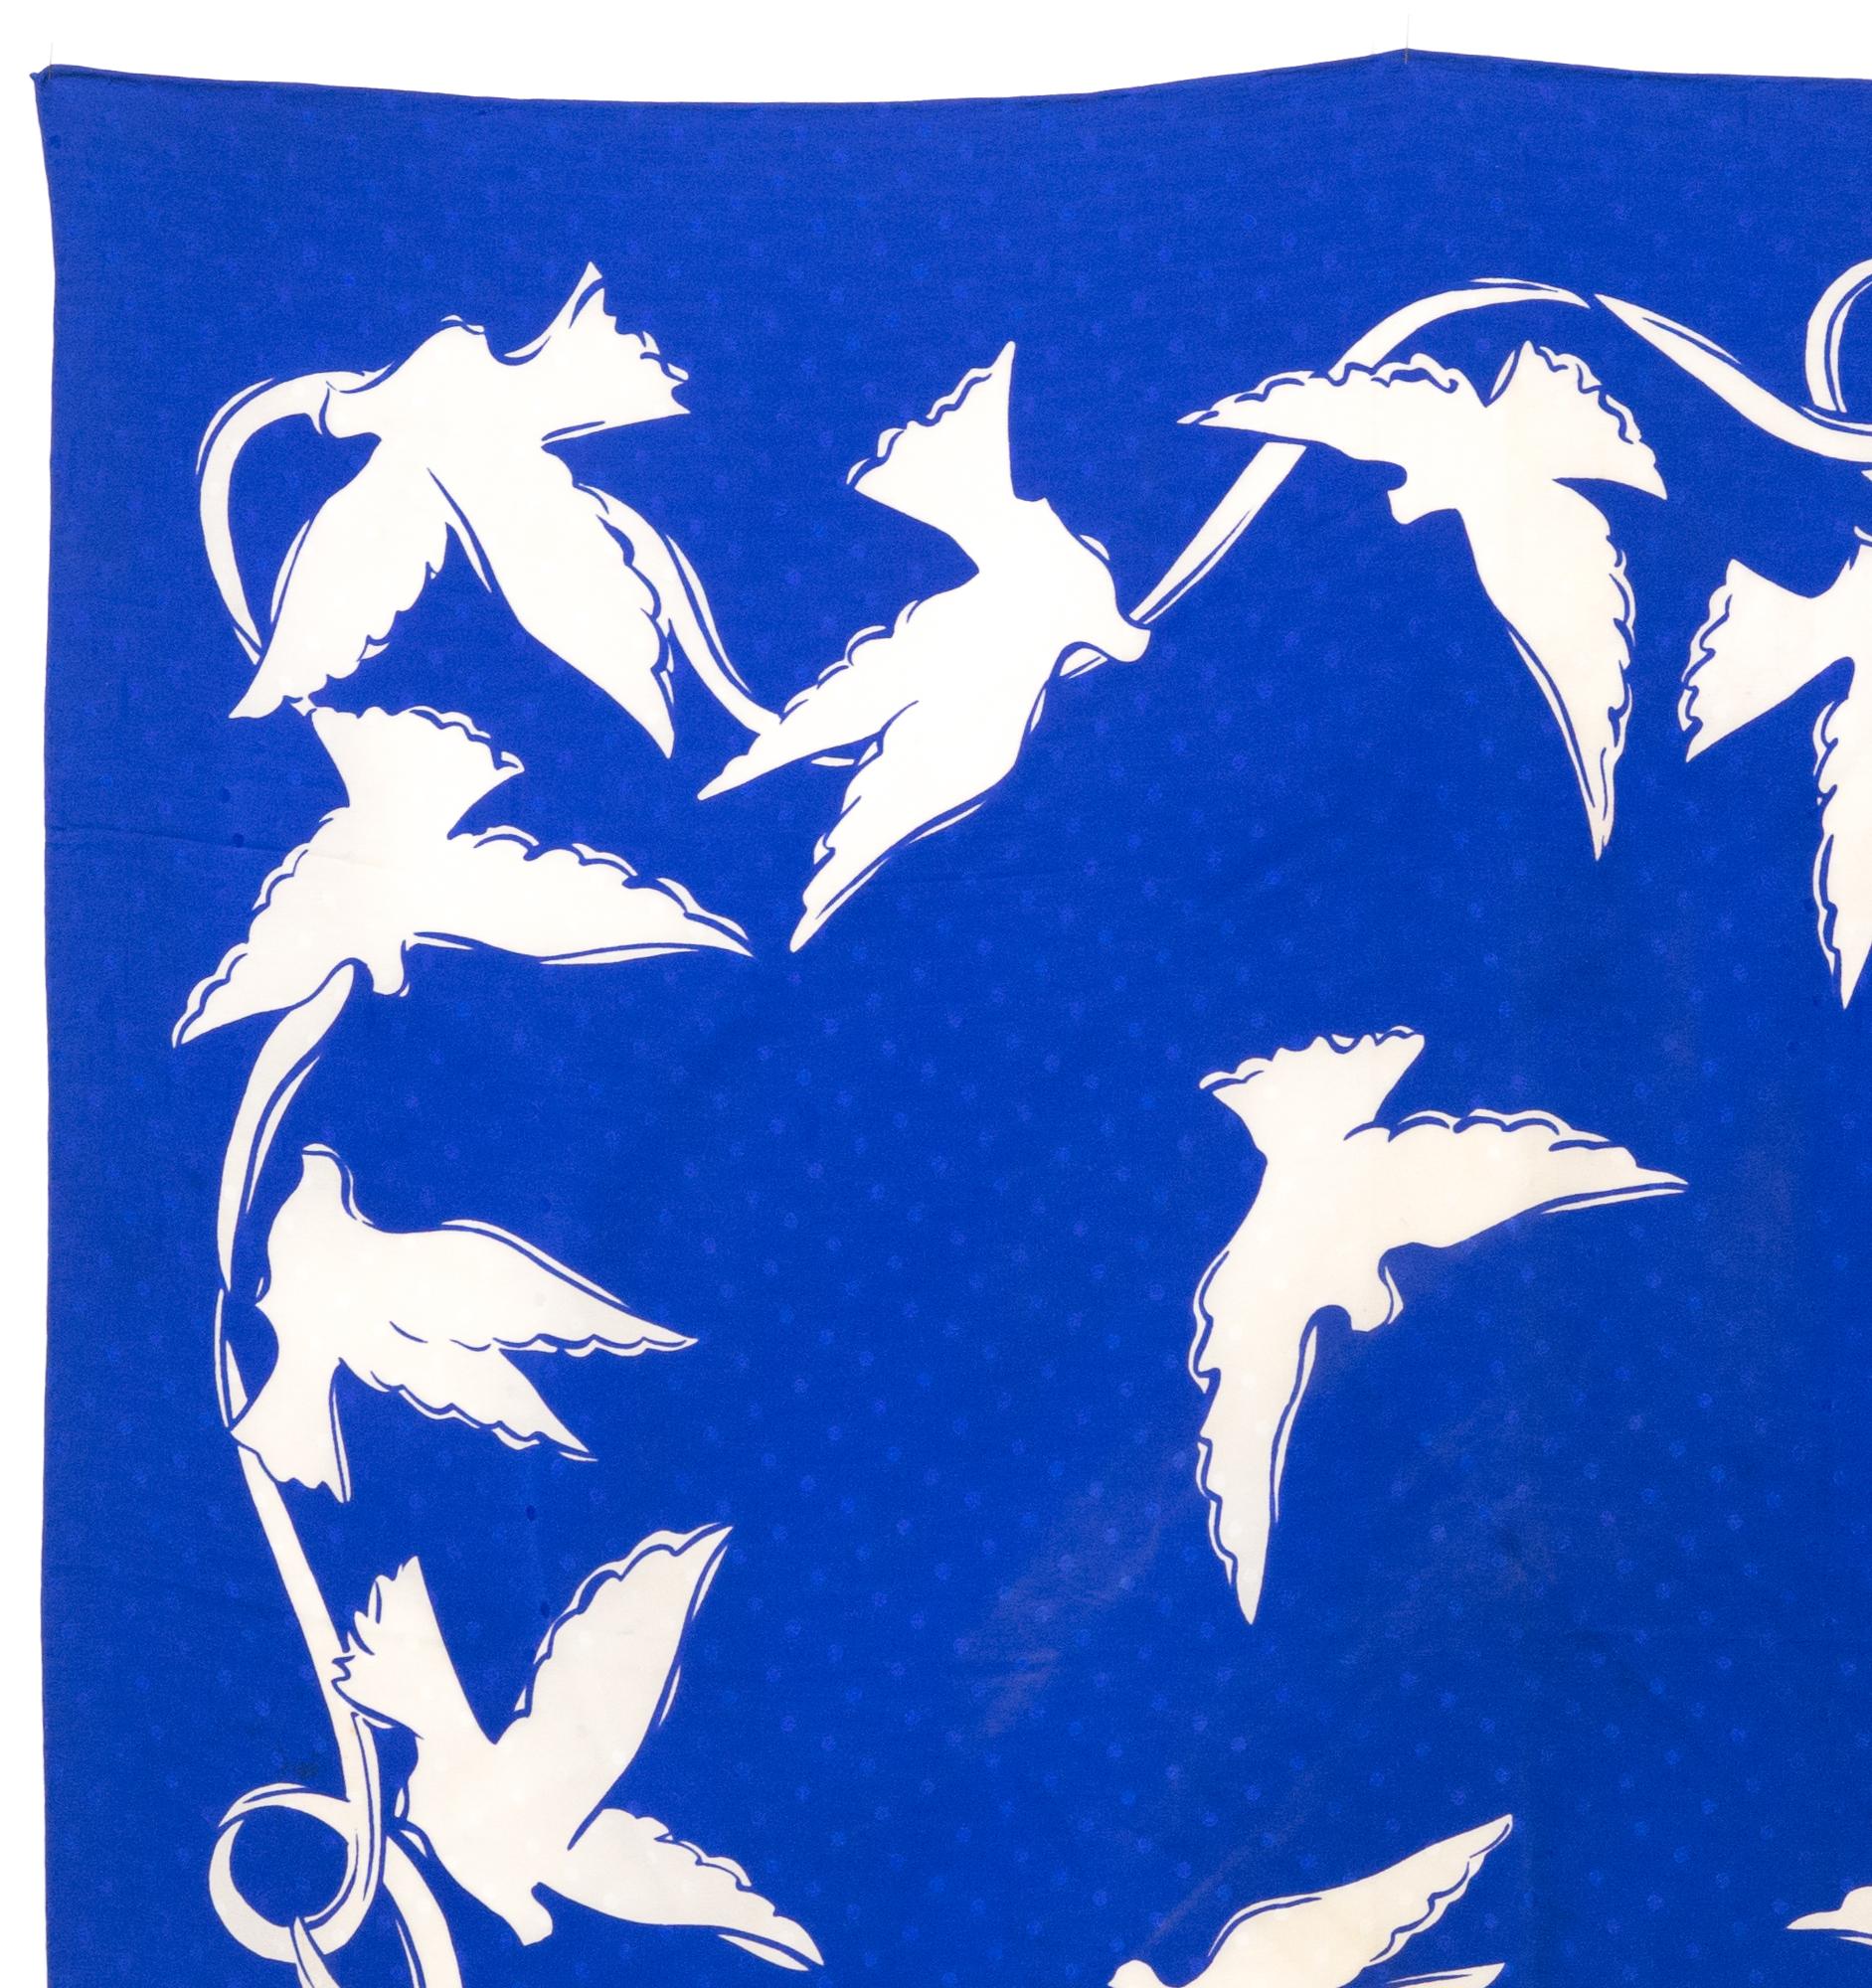 YSL Yves Saint Laurent  silk scarf featuring white doves, a blue jacquard ground, a YSL signature. 
Circa 1980s
In good vintage condition. Made in France.
34.6in. (88 cm) X 34.6in. (88 cm)
We guarantee you will receive this  iconic item as described